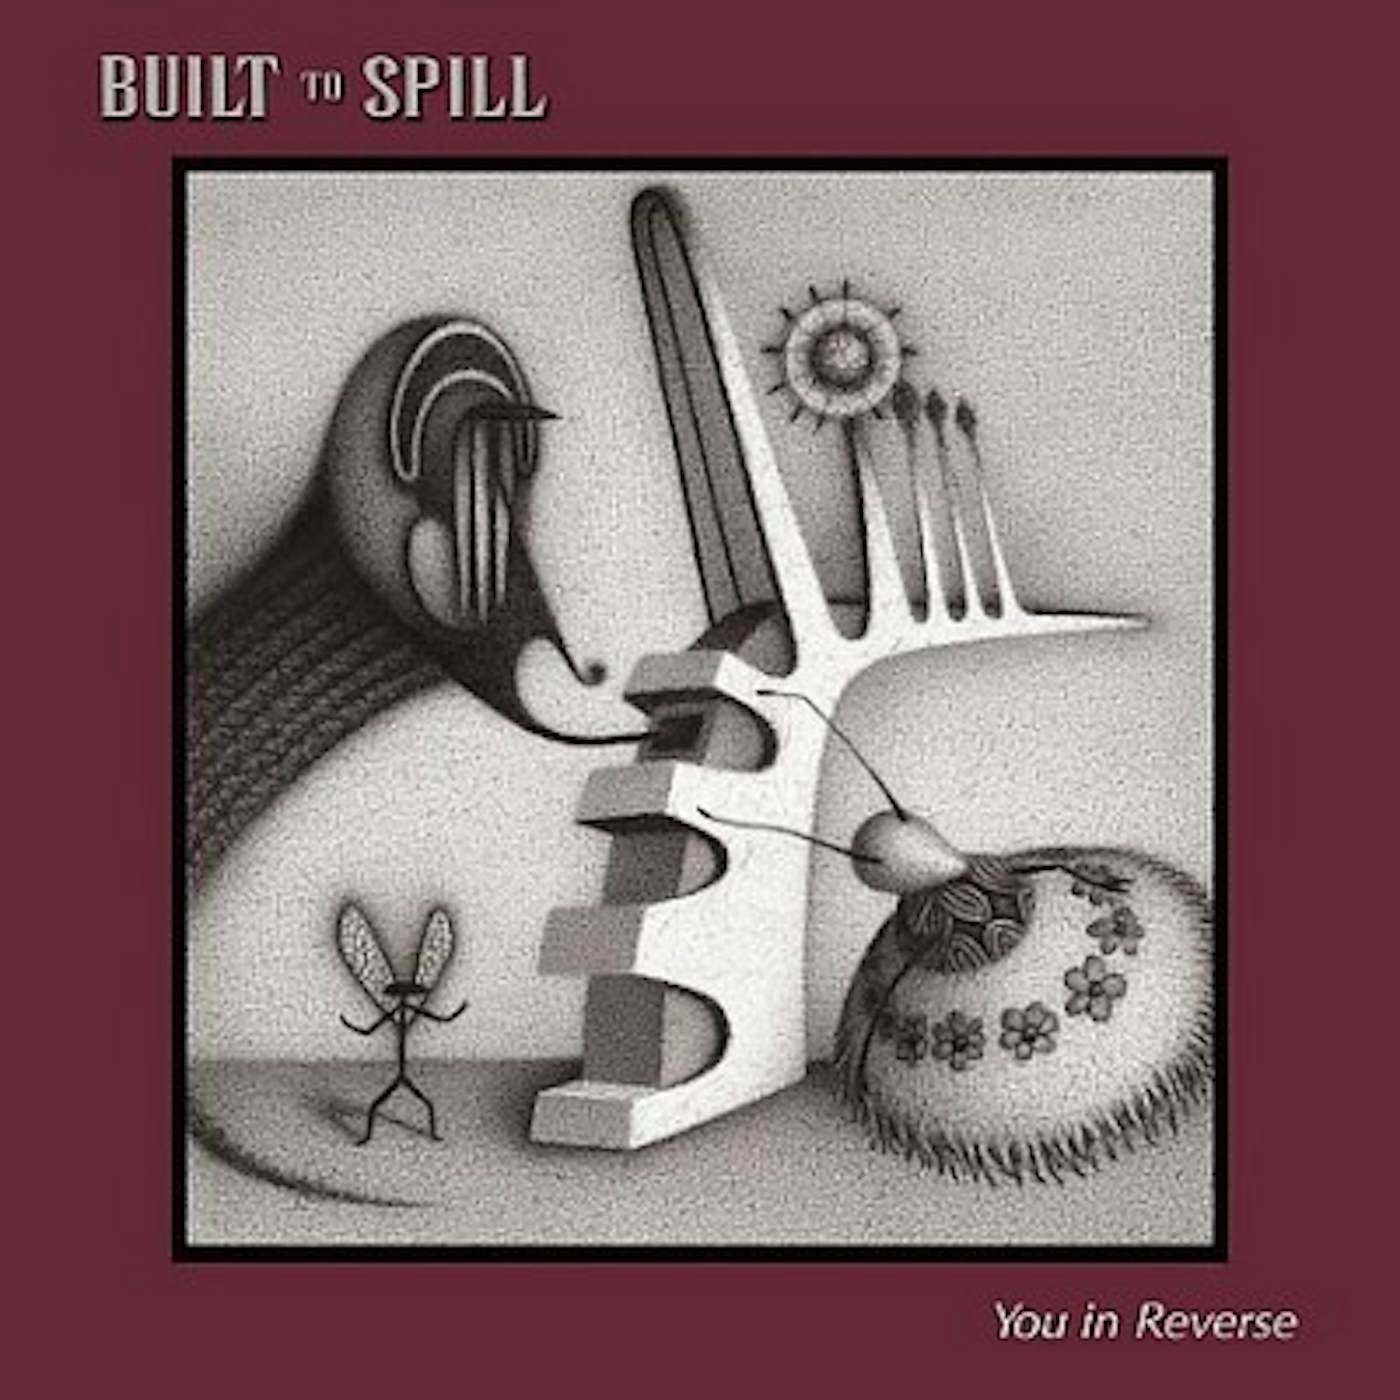 Built To Spill You in Reverse Vinyl Record